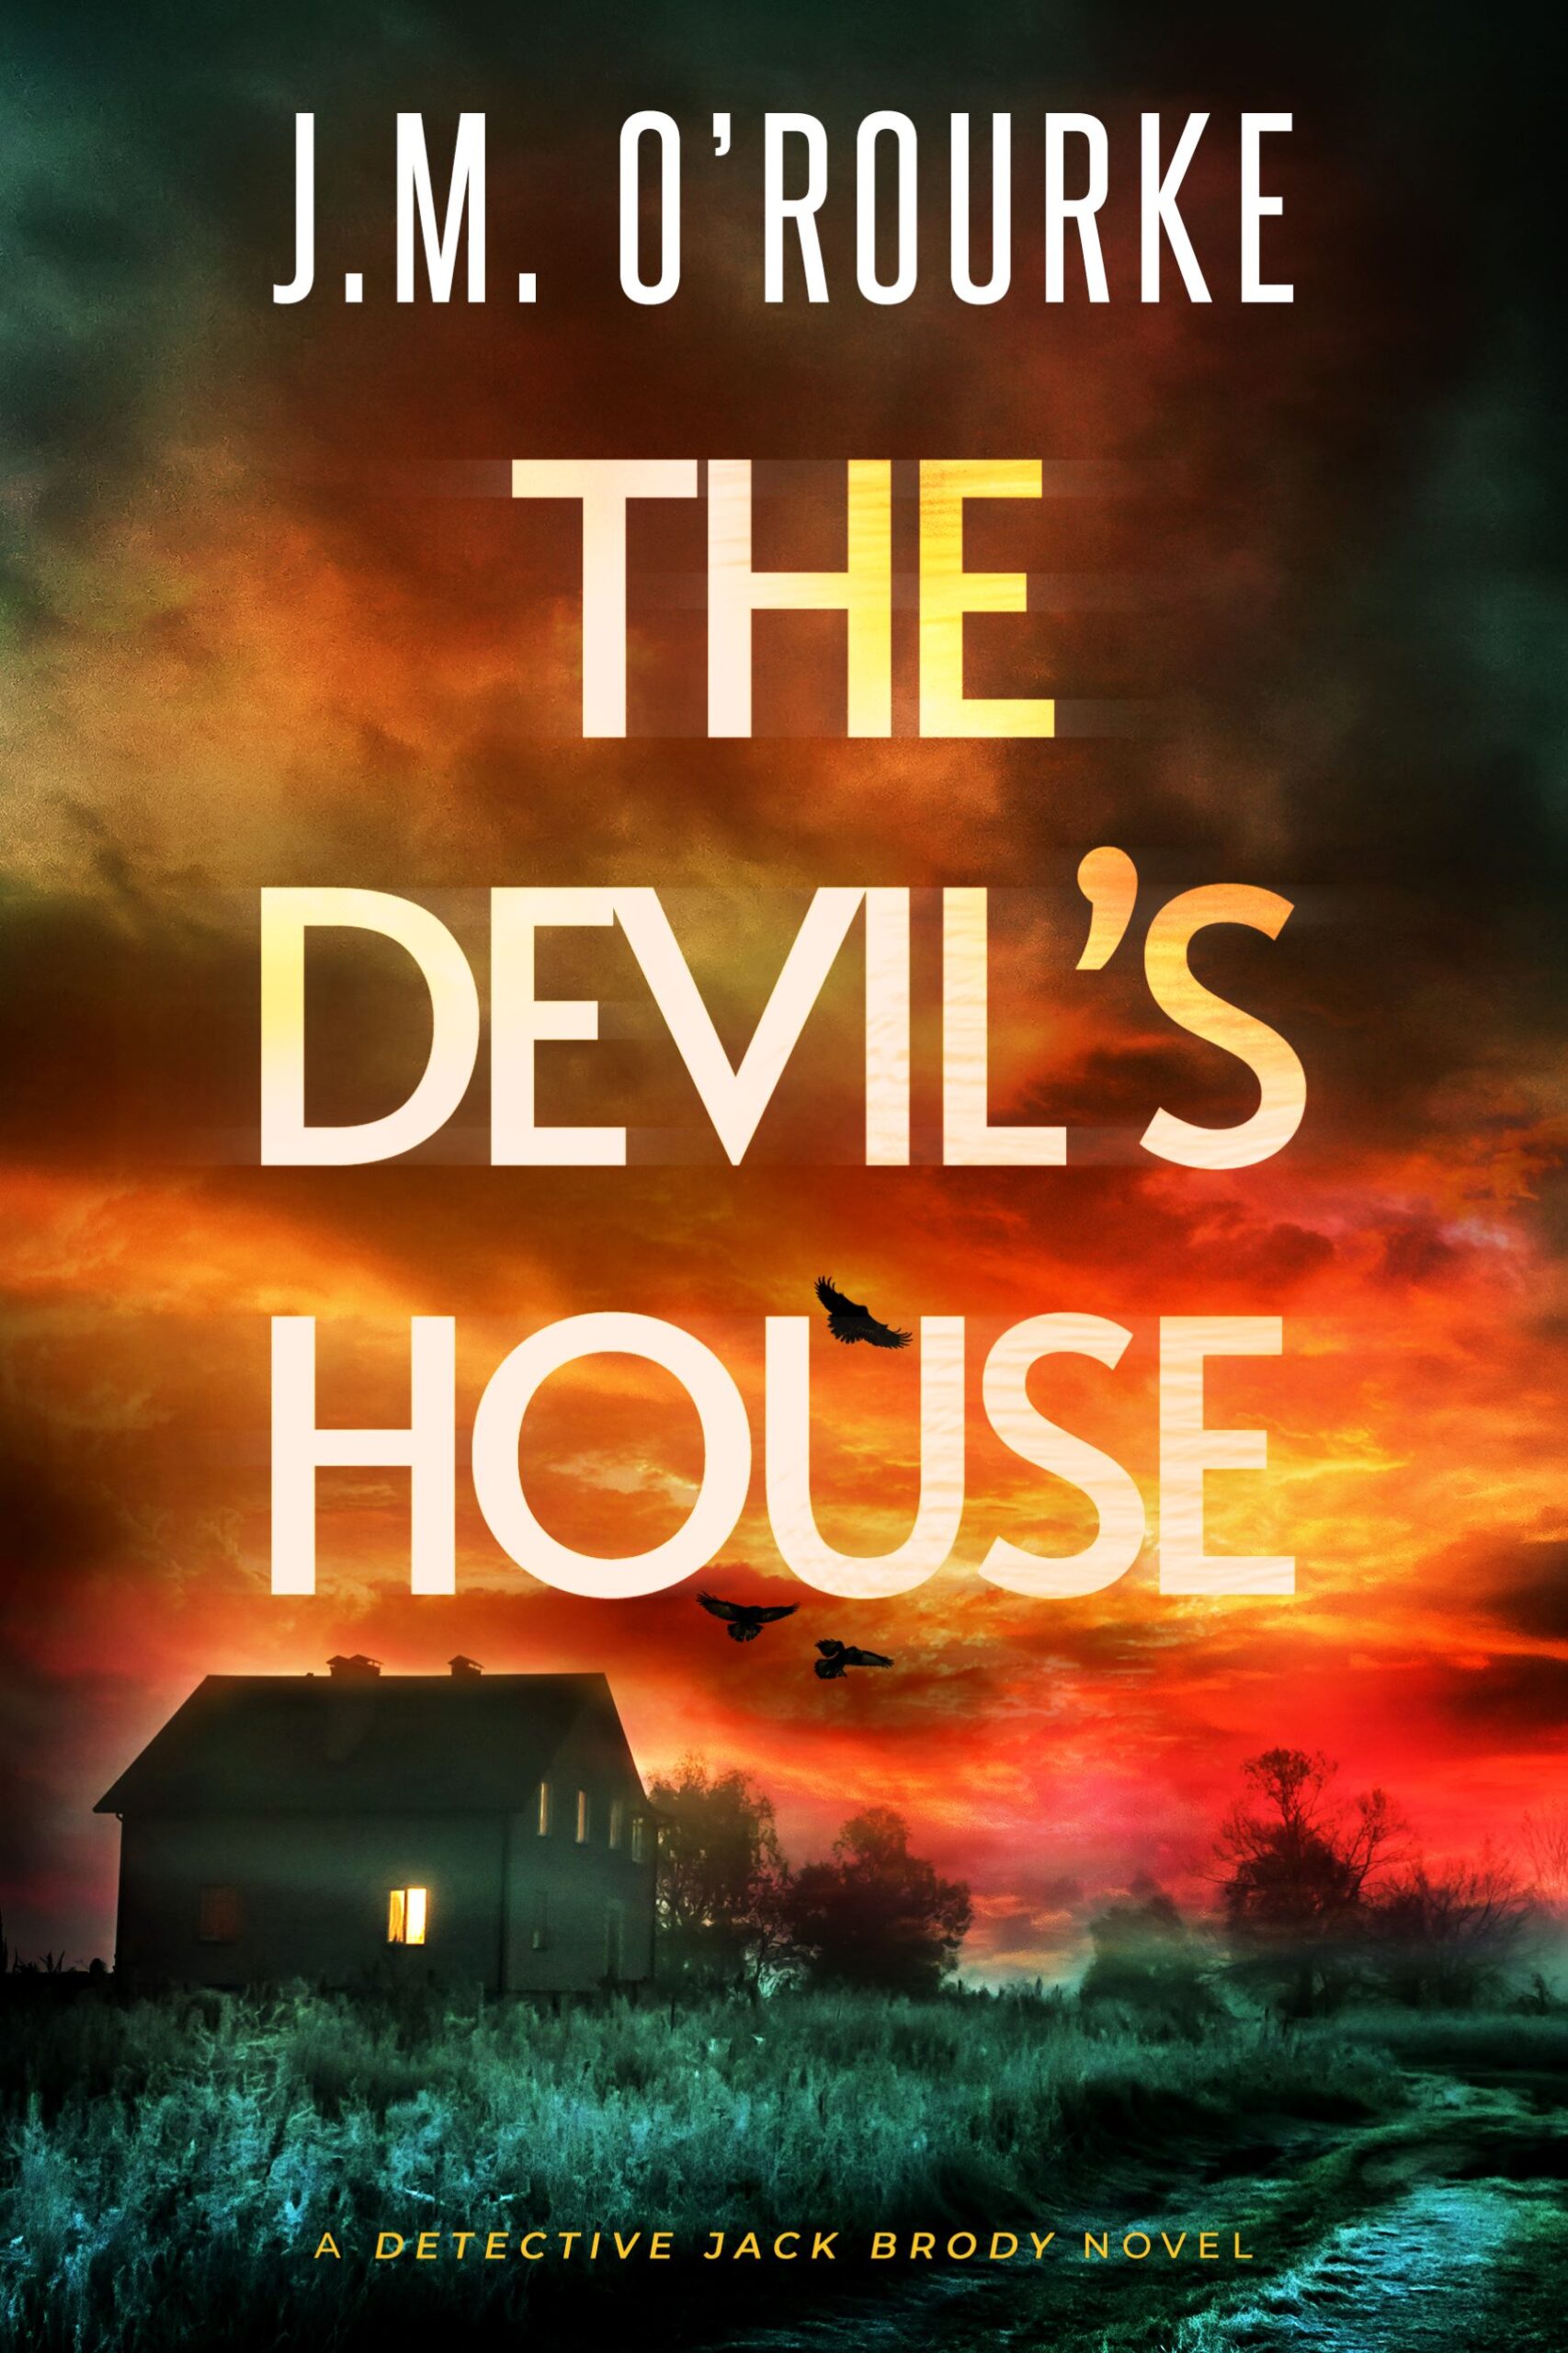 J.M. O’ROURKE NEW RELEASE – THE DEVIL’S HOUSE